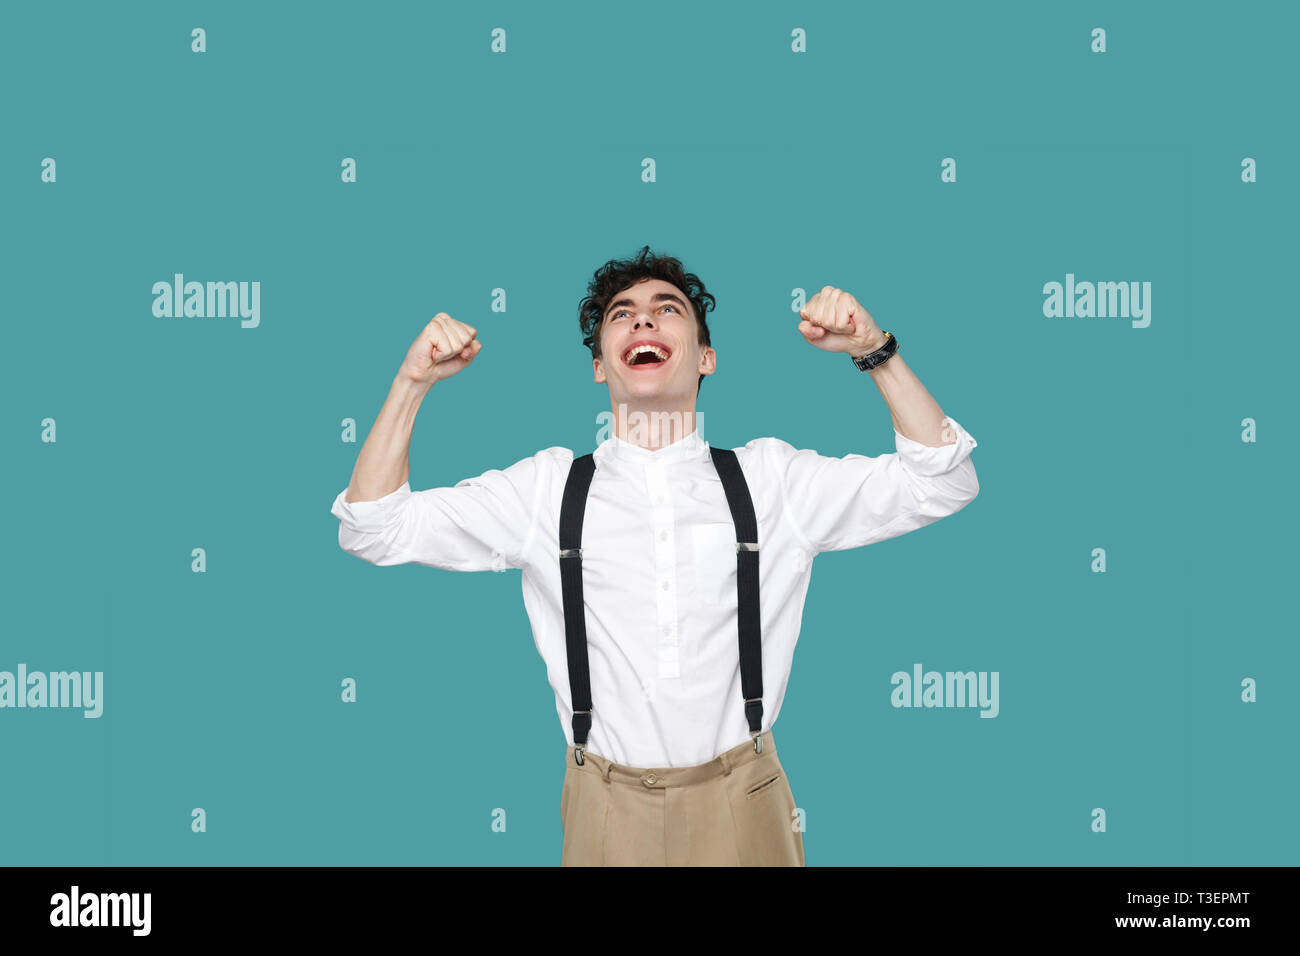 Happy excited man celebrating his victory. Portrait of handsome hipster curly young businessman in classic casual white shirt and suspender standing.  Stock Photo